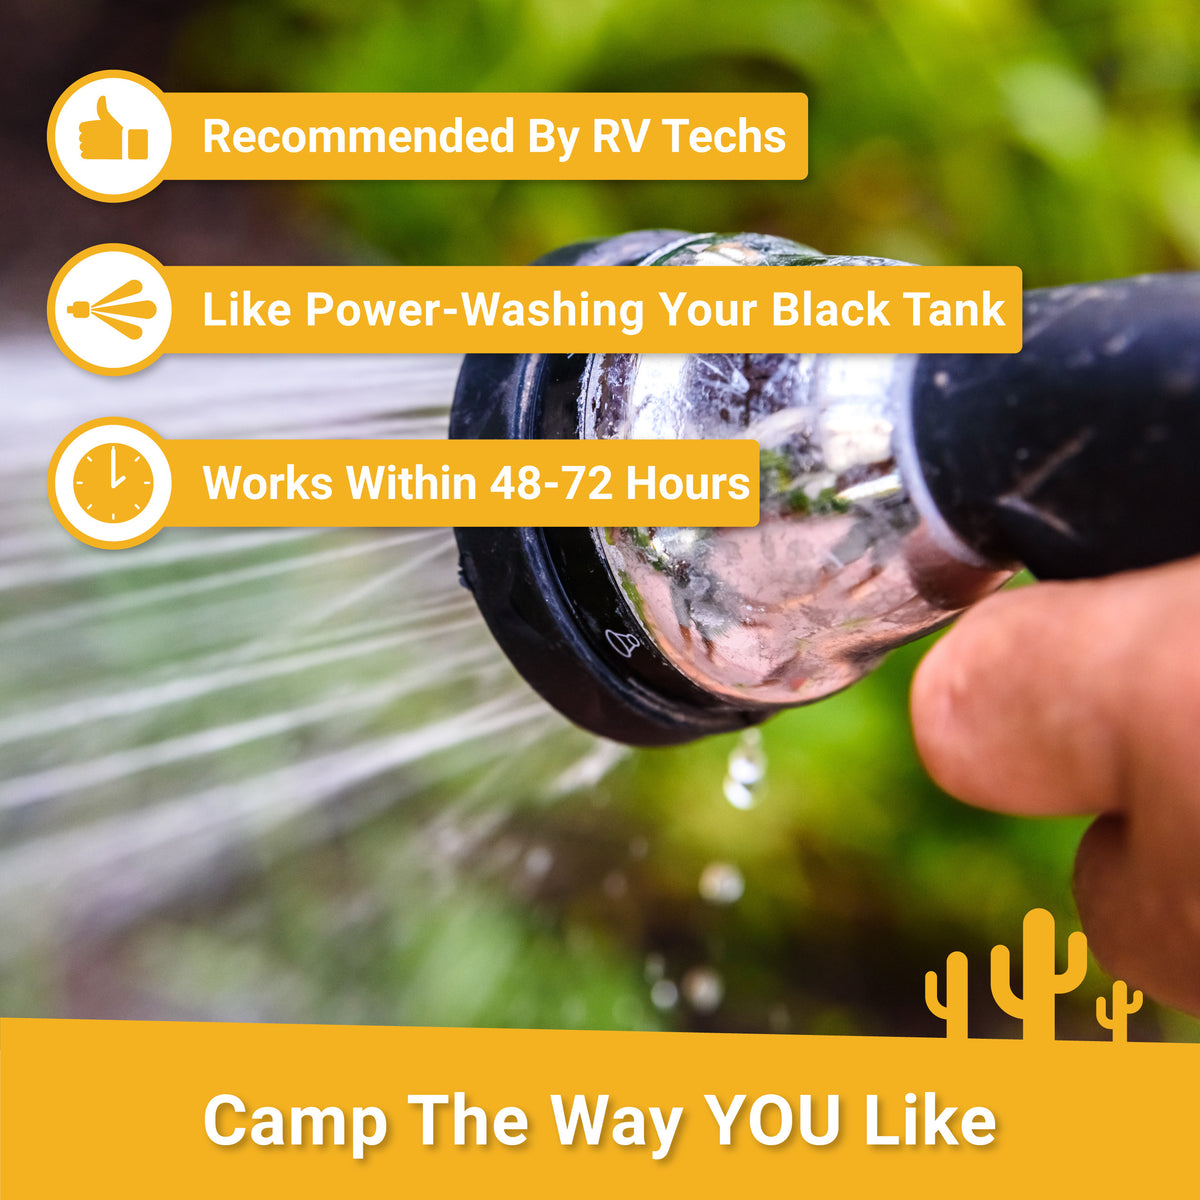 Camp the way you like. Recommended by techs. Works fast Unique Camping + Marine